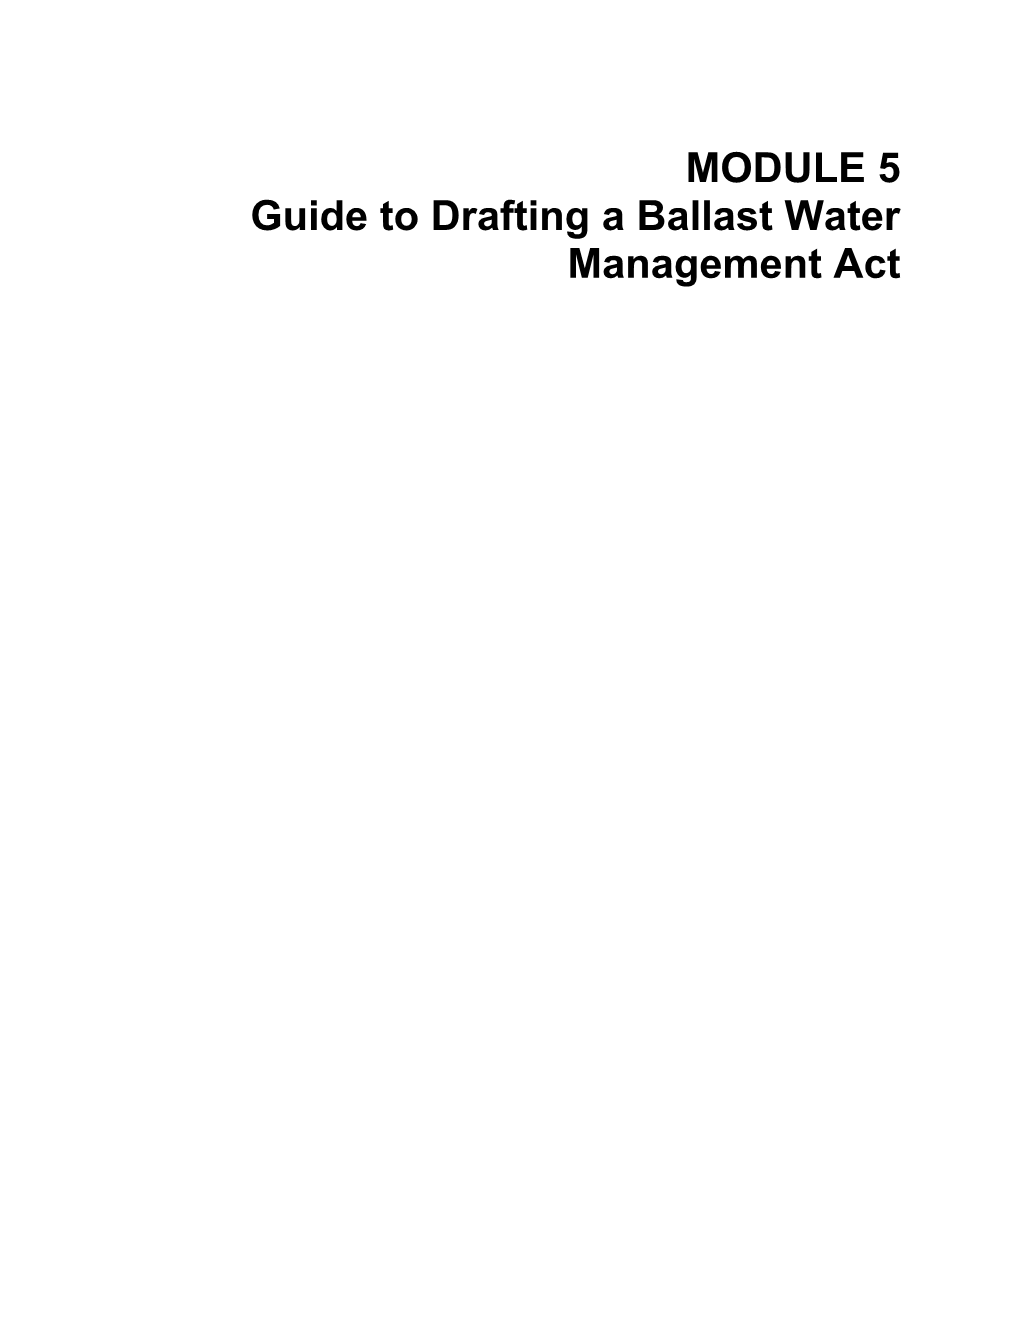 Guide to Drafting a Ballast Water Management Act